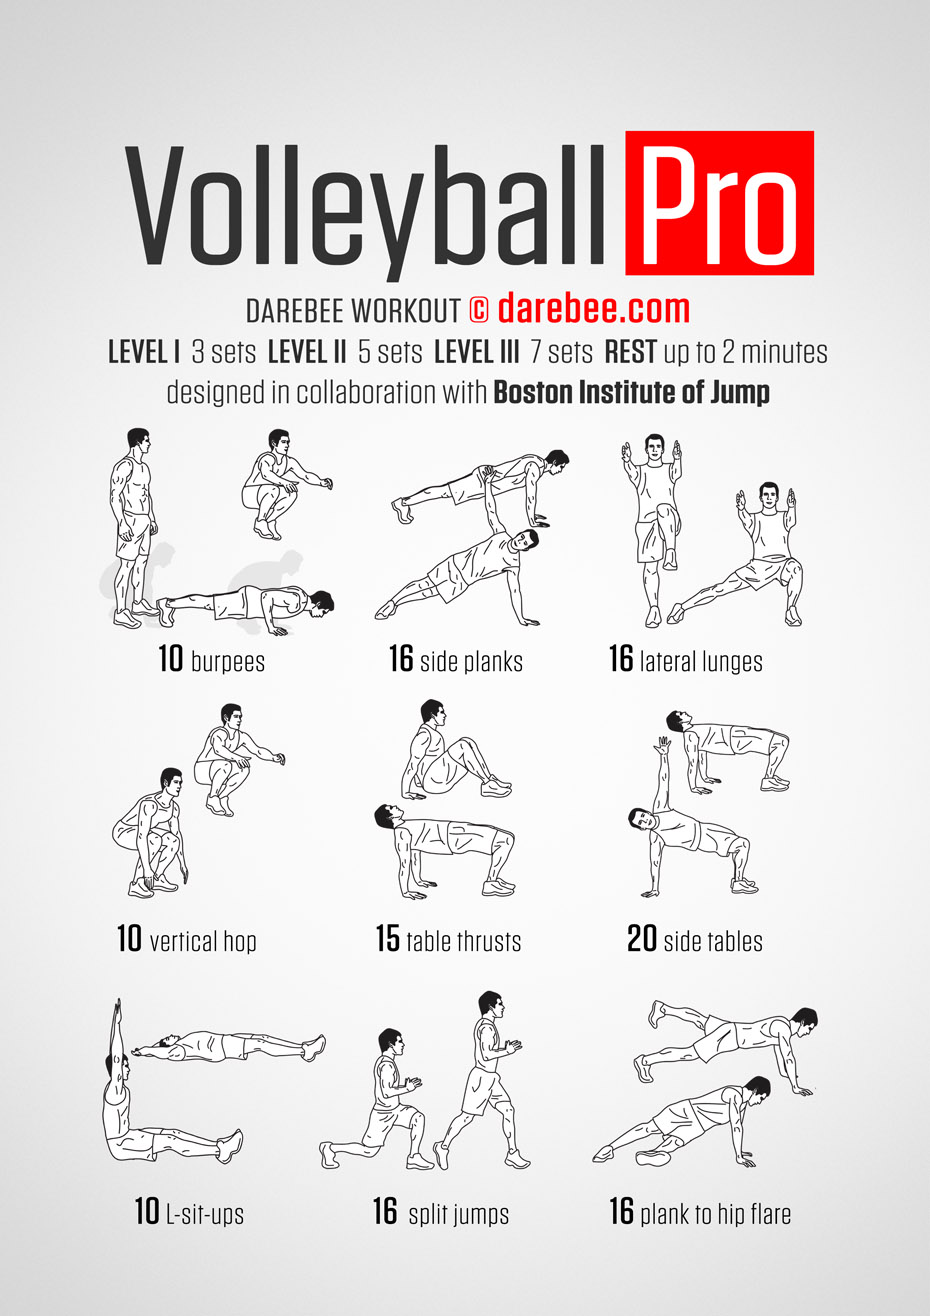 Volleyball Pro Workout